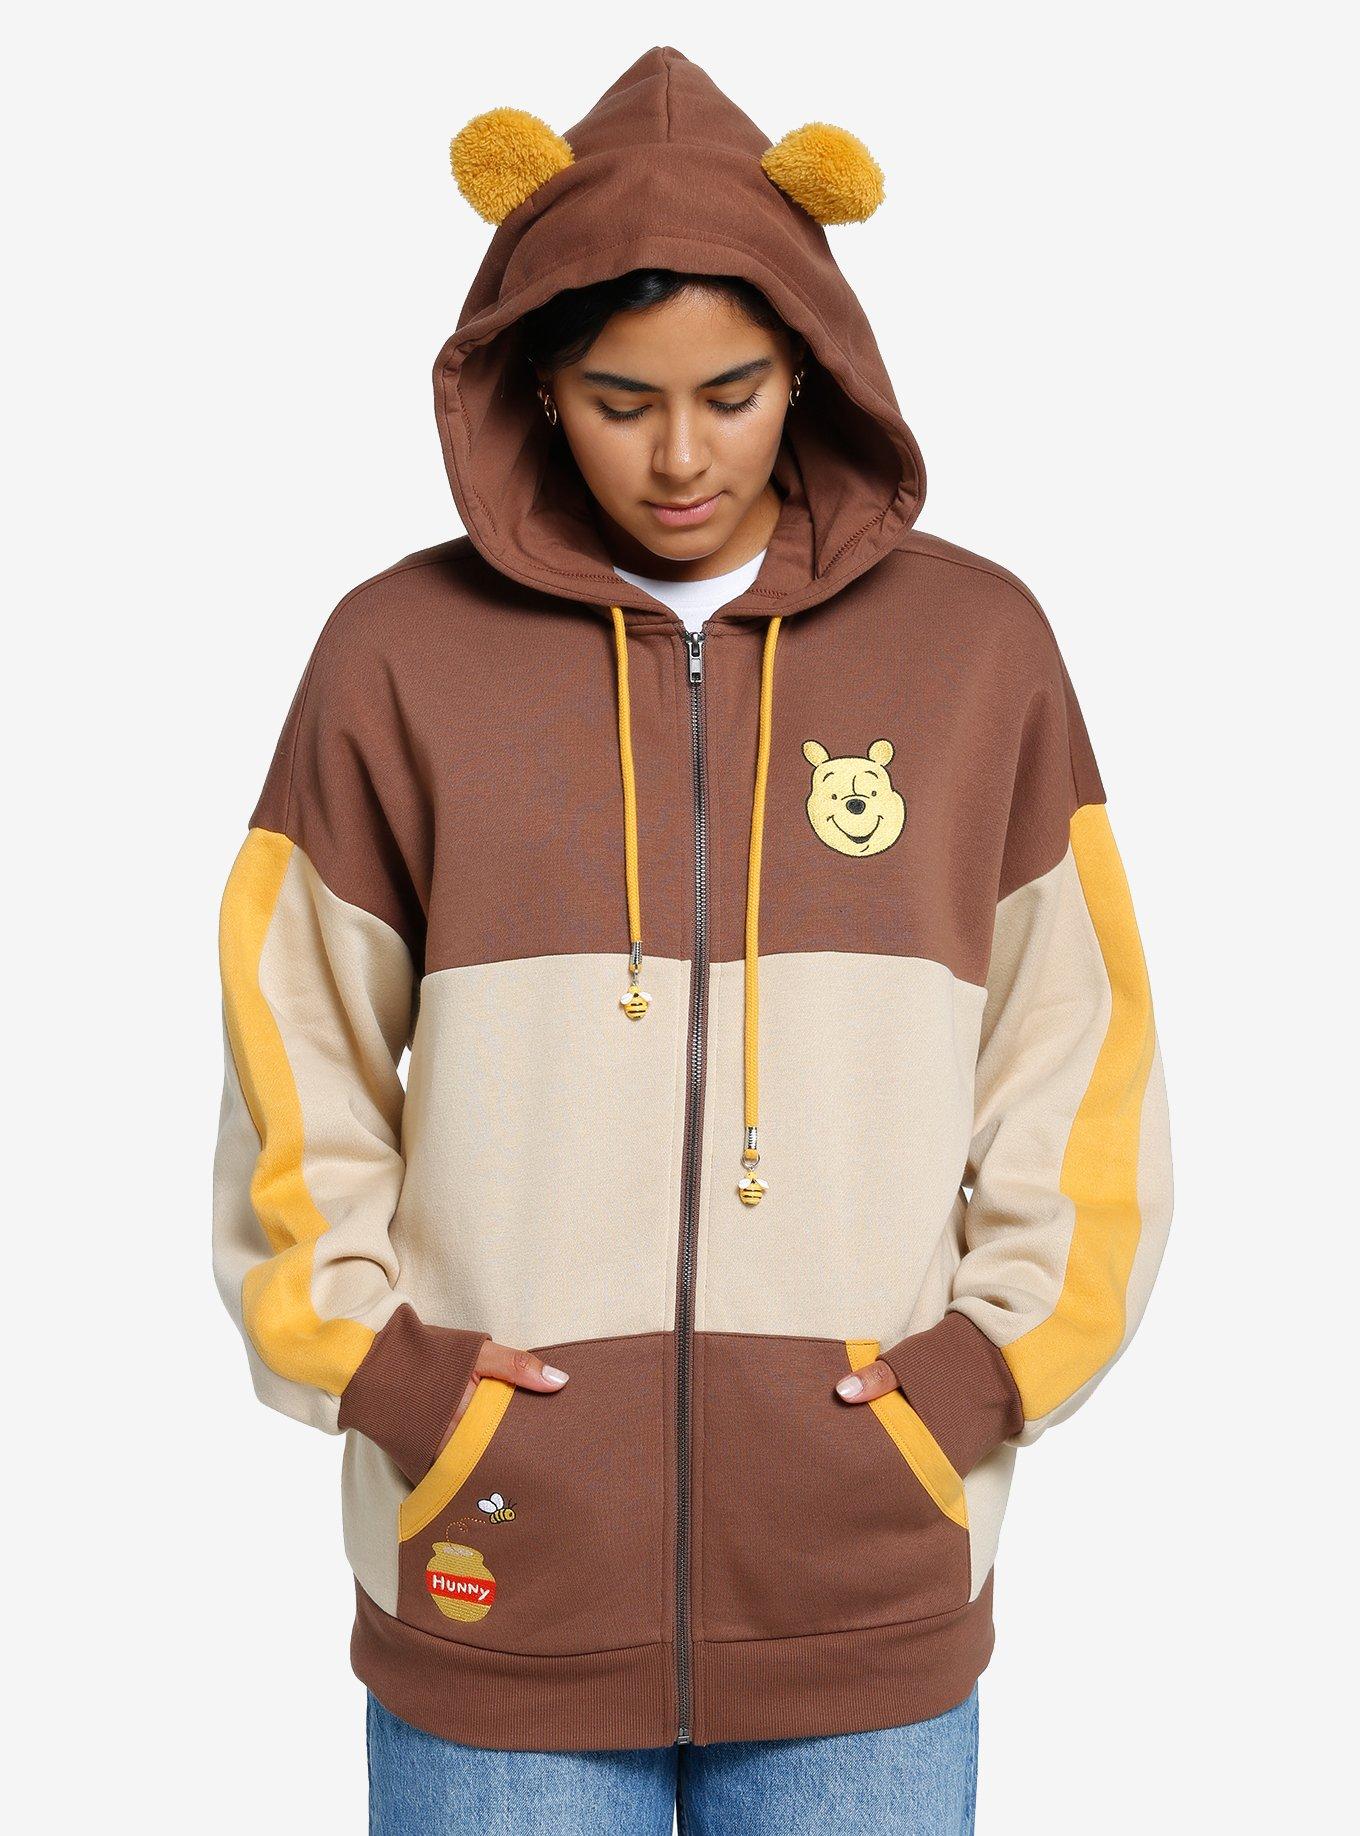 League of Legends Oodie Oversized Blanket Hoodies merch, clothing & apparel  - Anime Ape